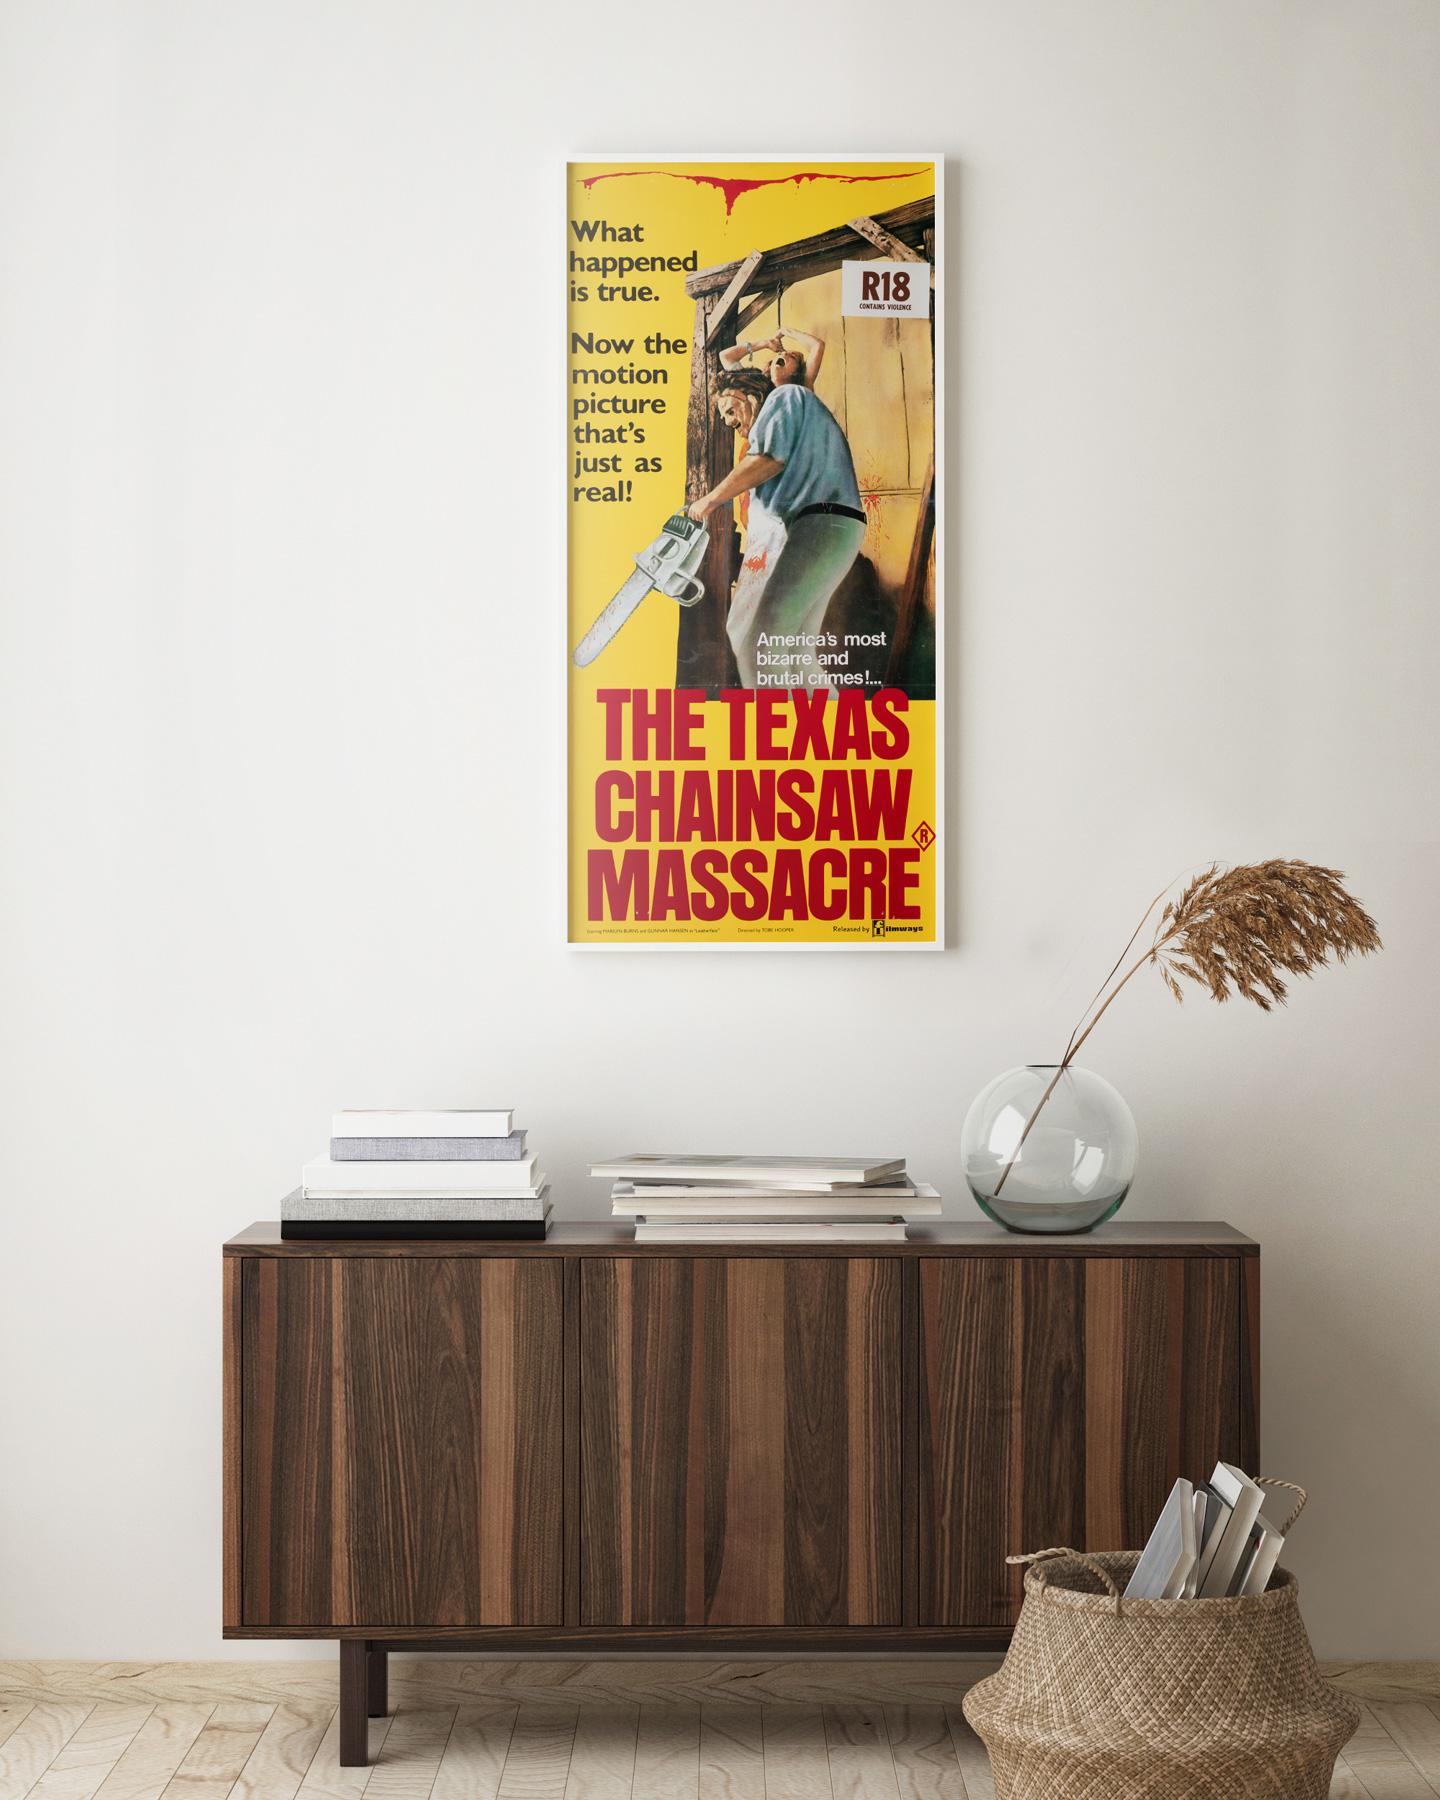 Fantastic original first-year-of-release Australian Daybill film poster for The Texas Chainsaw Massacre. One of the best horrors ever made? Certainly one of the most iconic.

This vintage movie poster is sized 13 x 28 inches. It will be sent